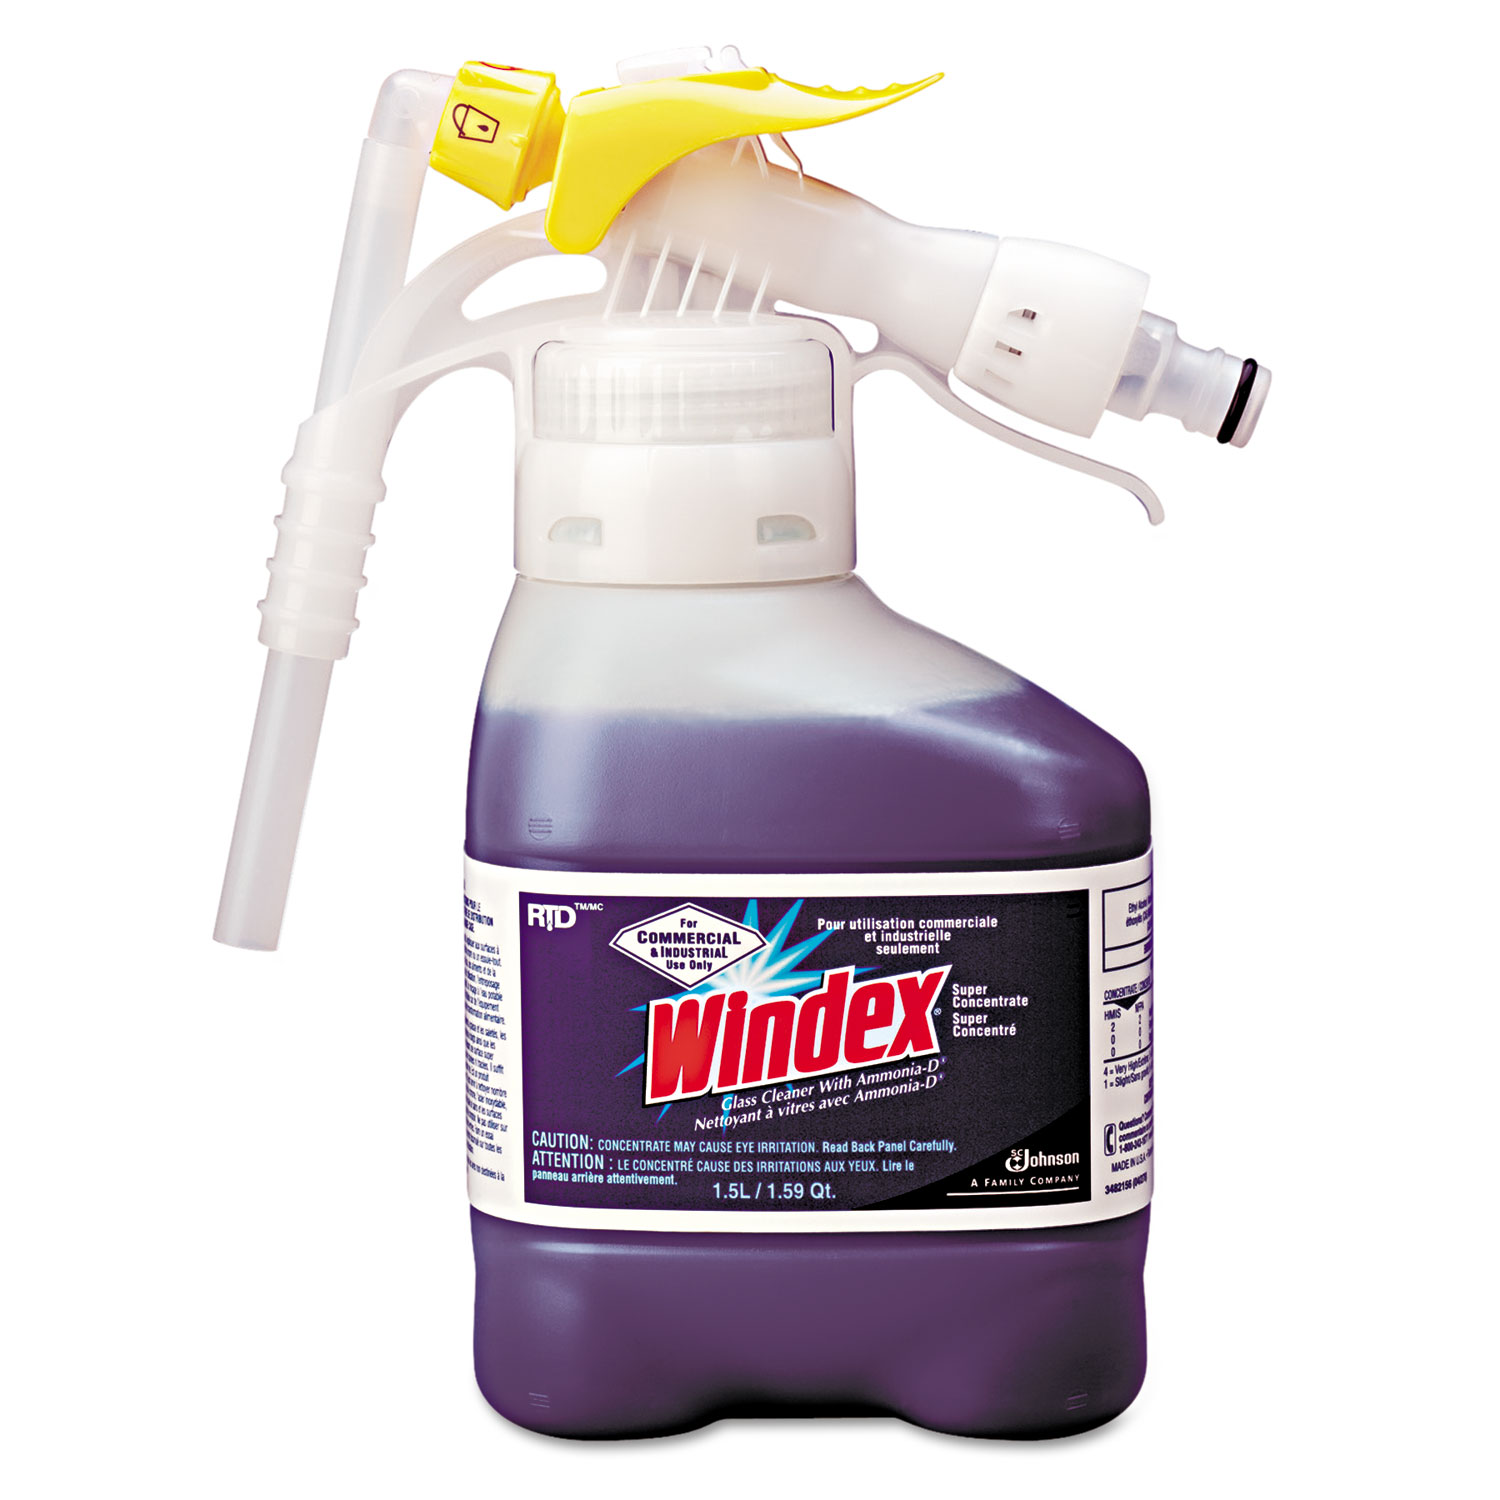 Super-Concentrated Ammonia-D Glass Cleaner RTD, 50.7oz Bottle